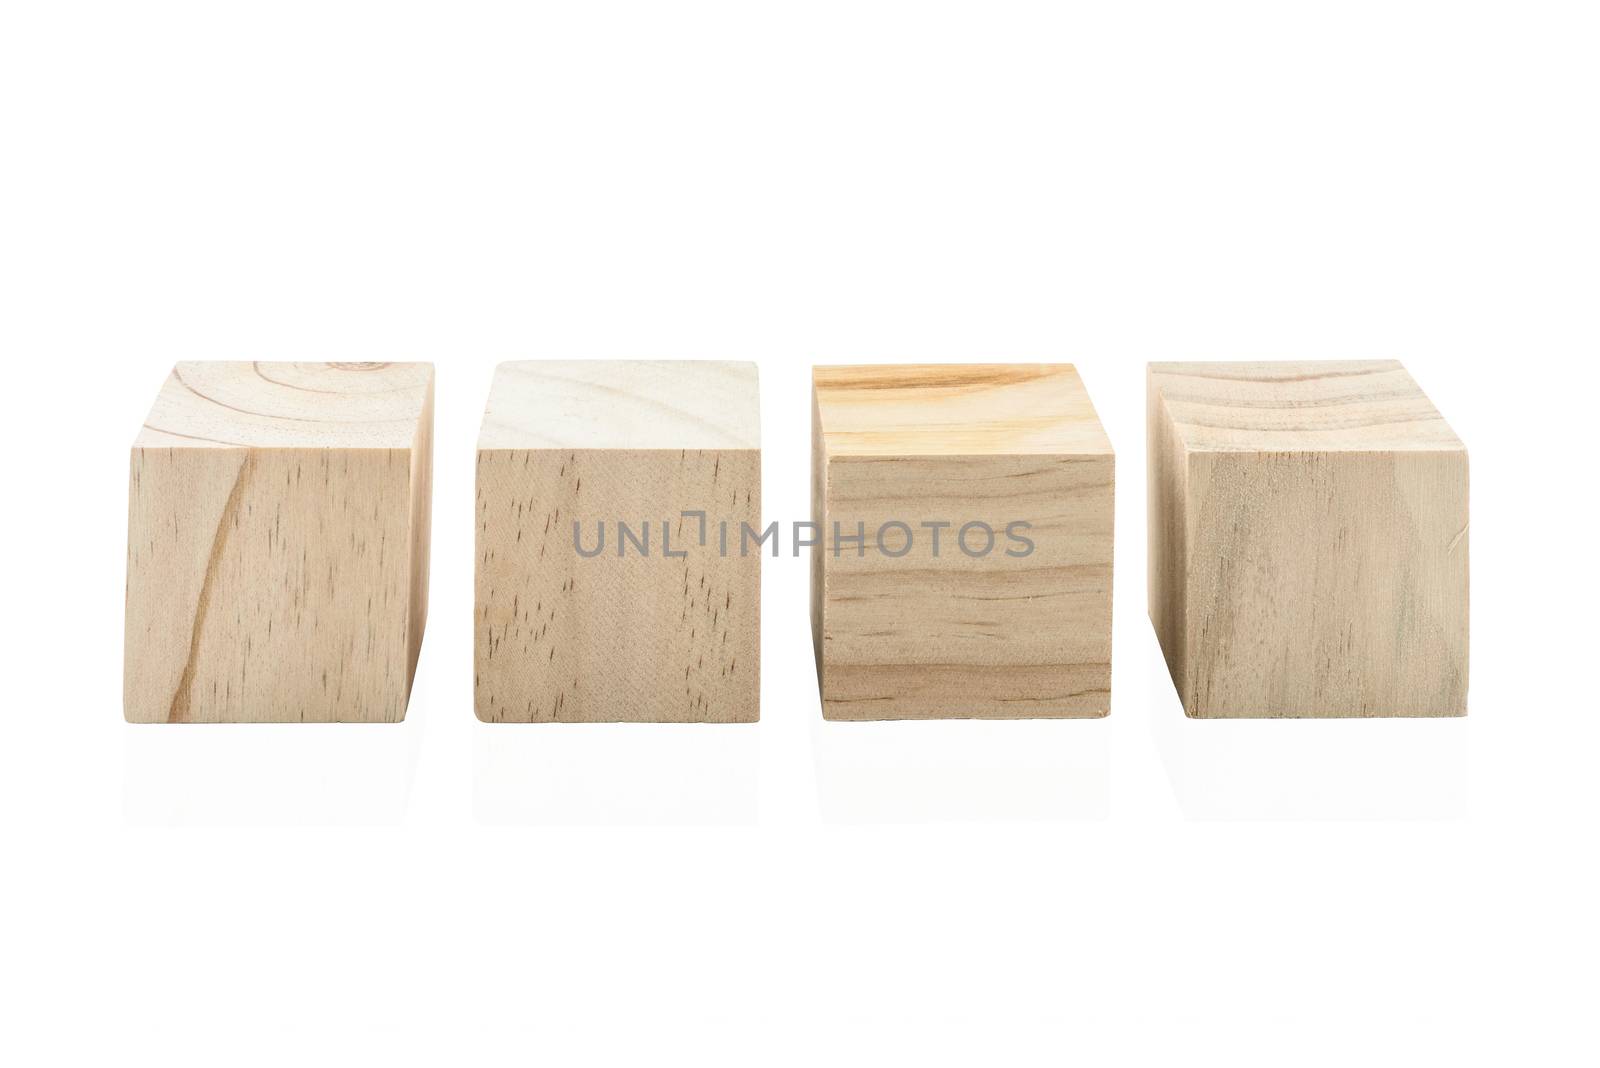 Wooden Building Blocks isolated against white background